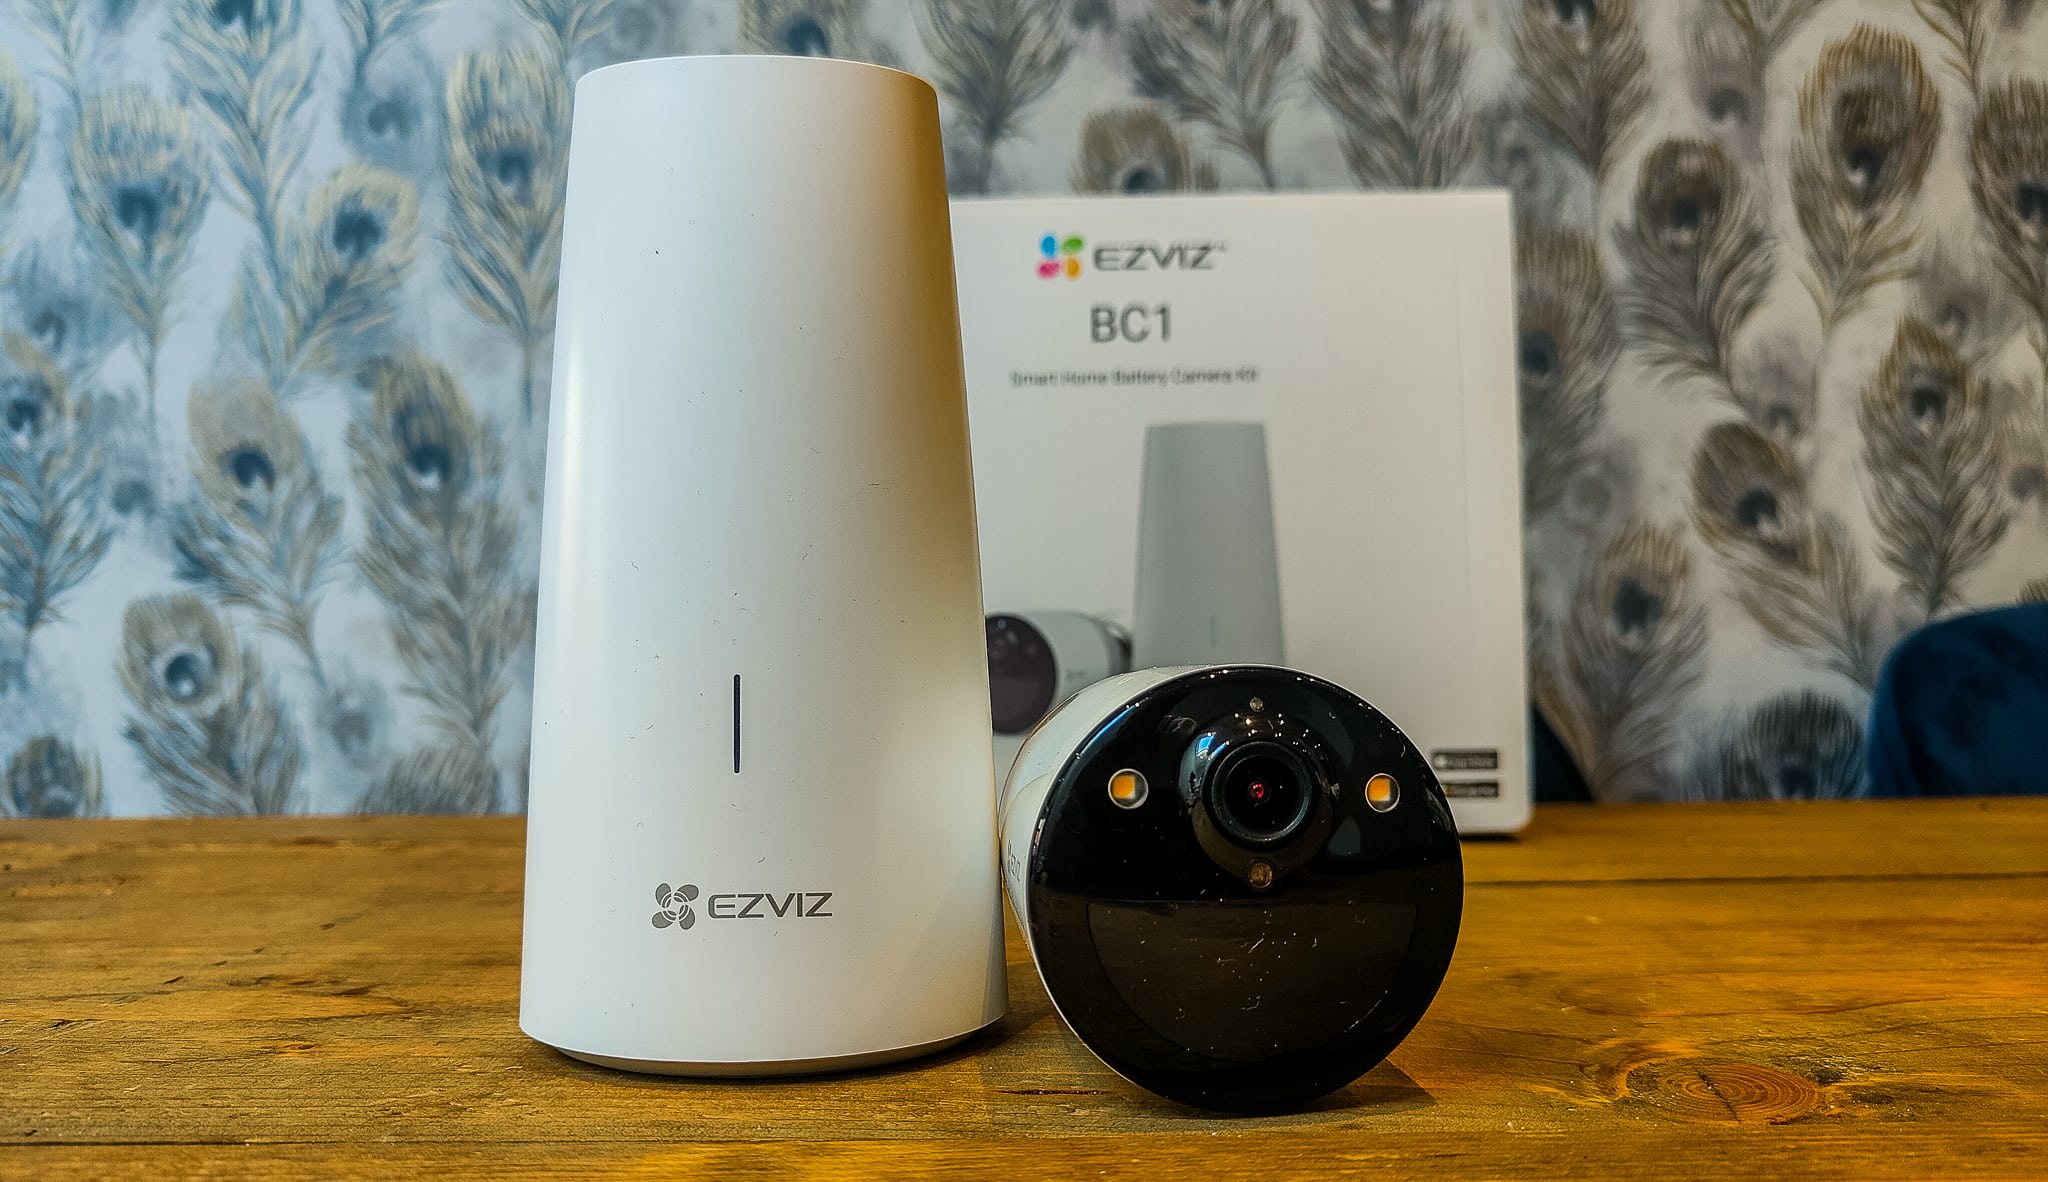 Ezviz BC1 Battery Powered Security Camera Kit Review: Colour night vision, human detection and 365-day battery make this an appealing choice